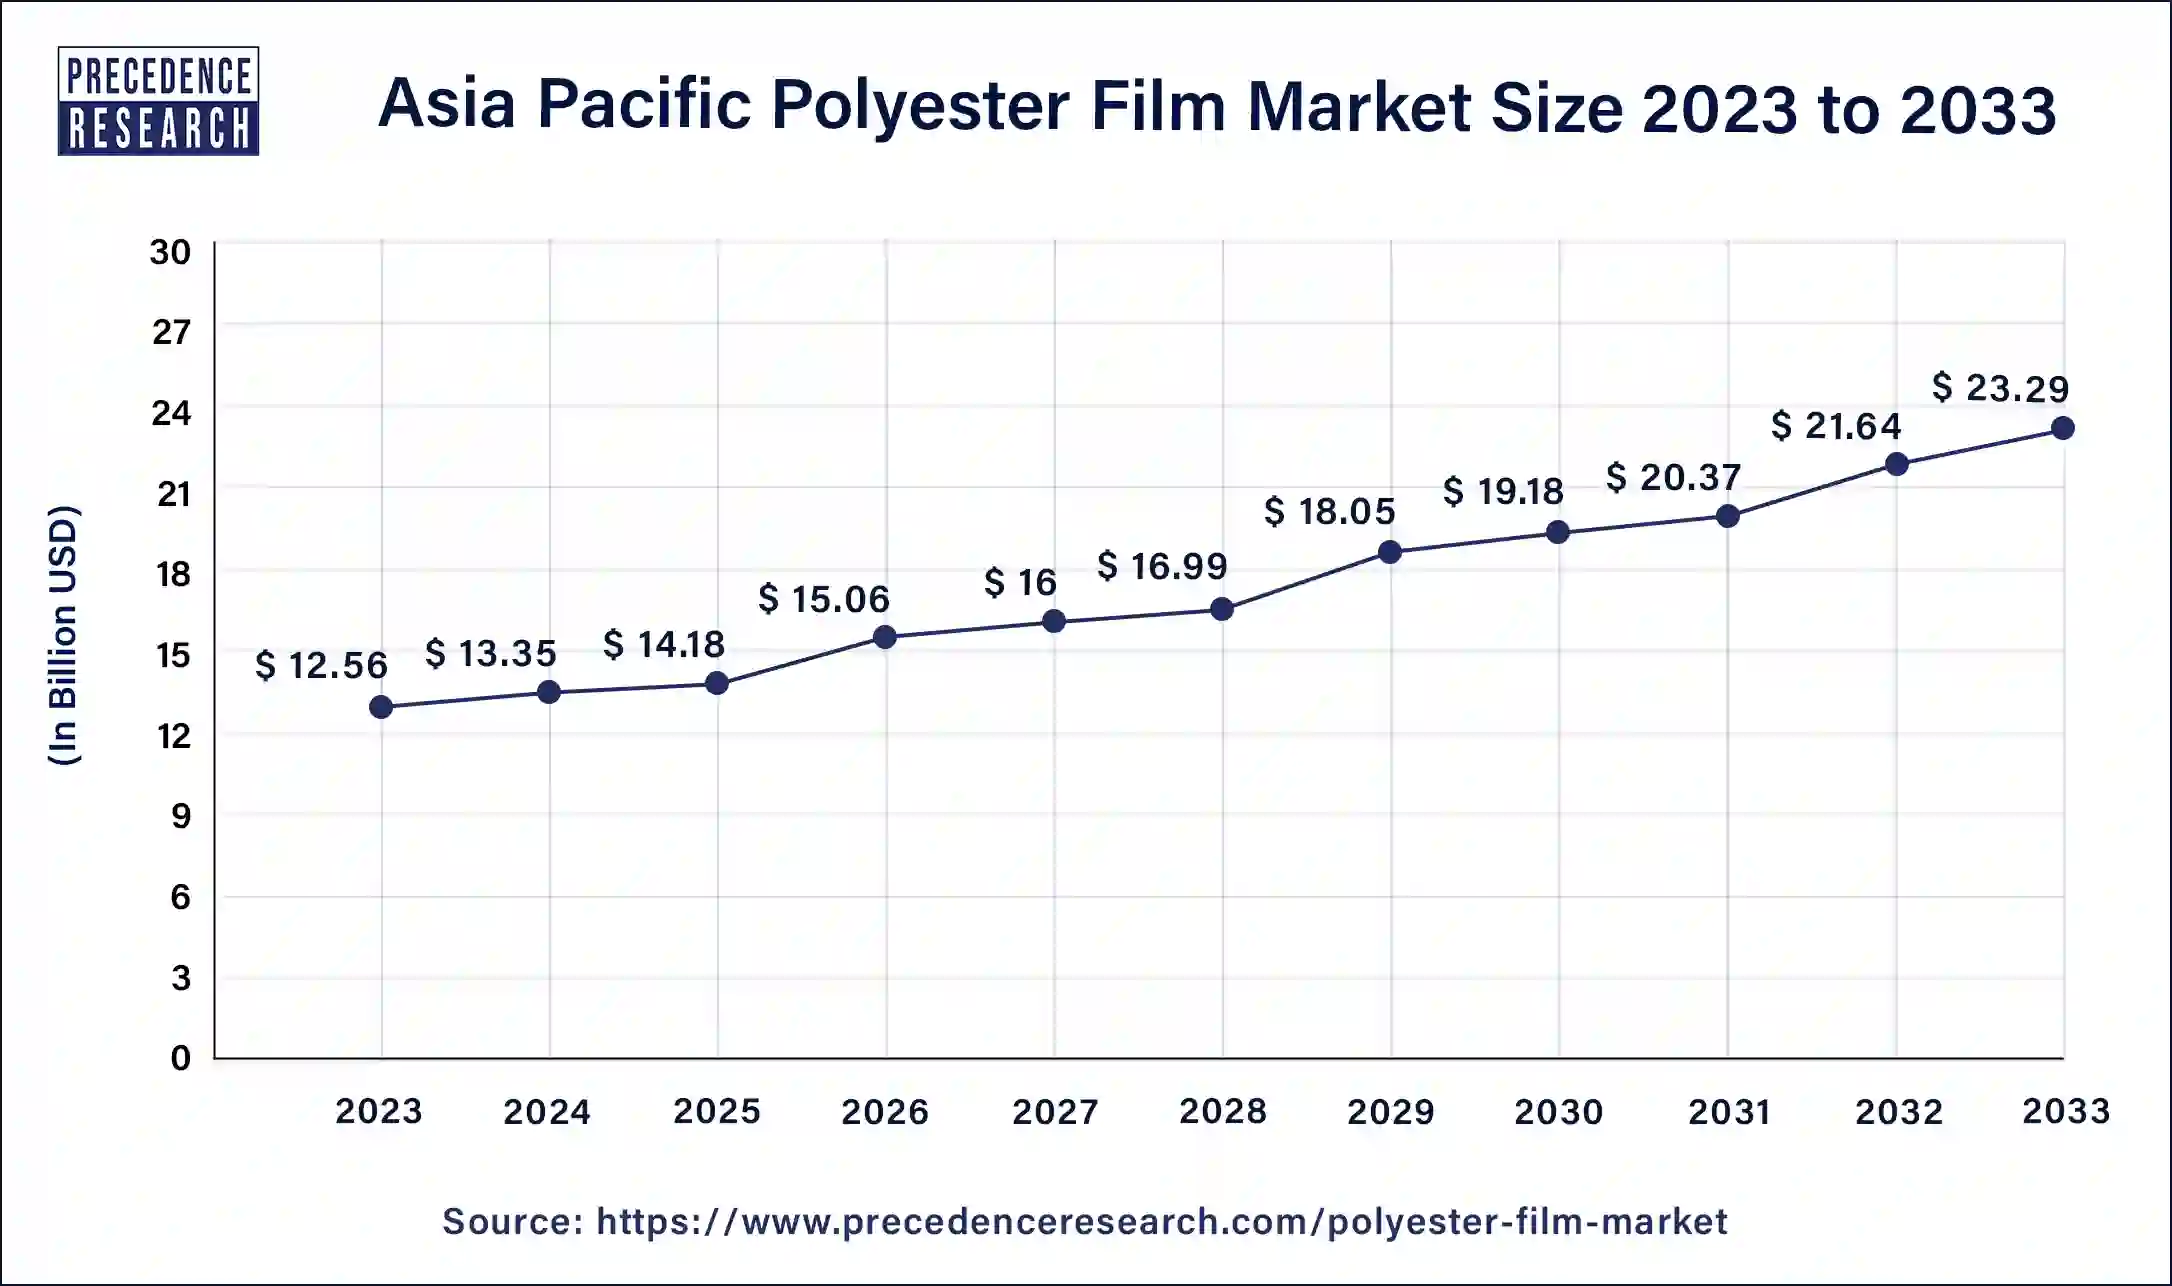 Asia Pacific Polyester Film Market Size 2024 to 2033